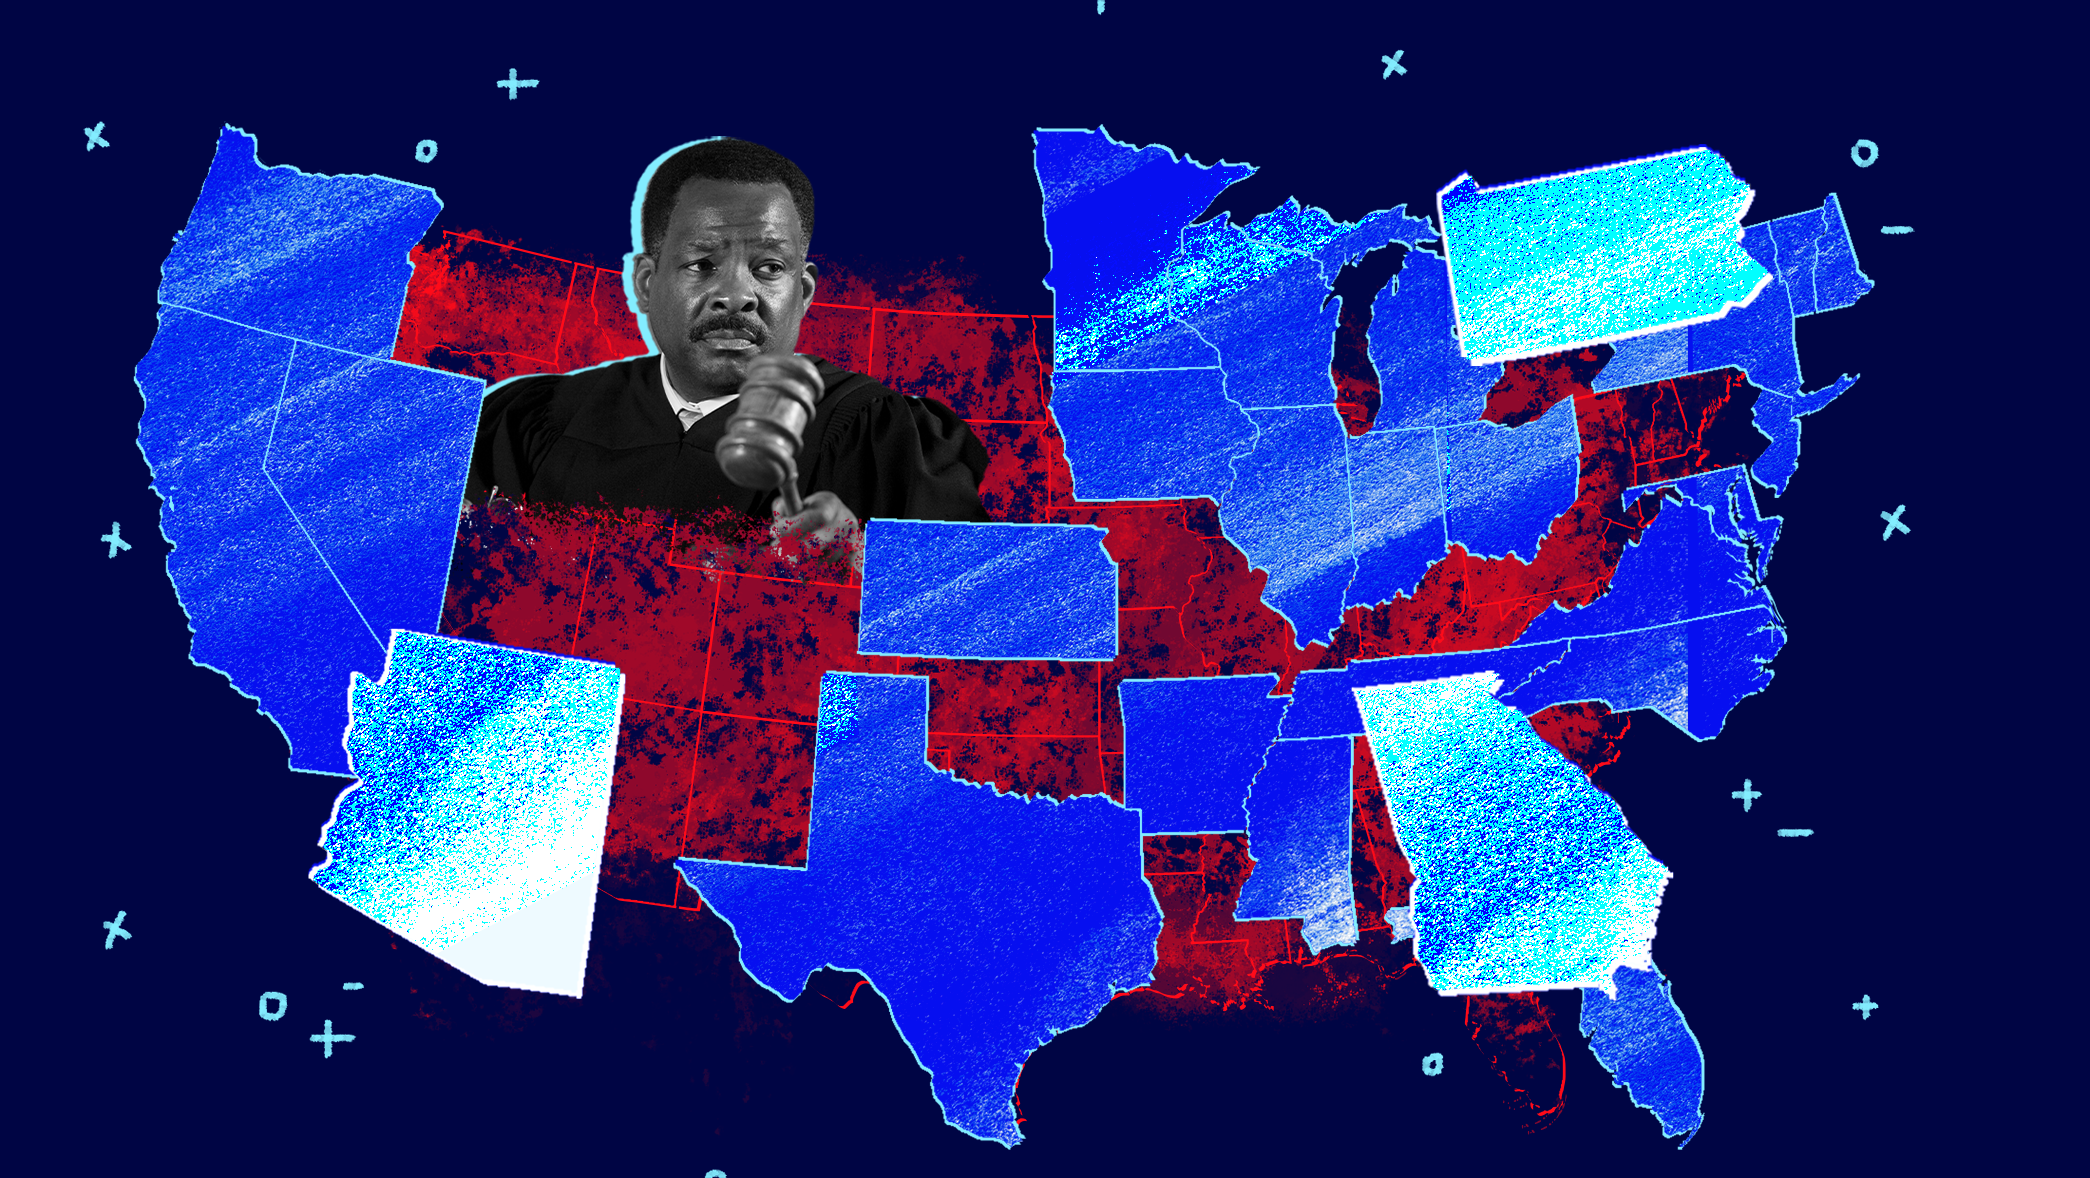 Blue background with map of the United States that is partially shaded in a lighter shade of blue and red and three main states highlighted: Arizona, Georgia and Pennsylvania. On the left side of the map is a judge holding a gavel.